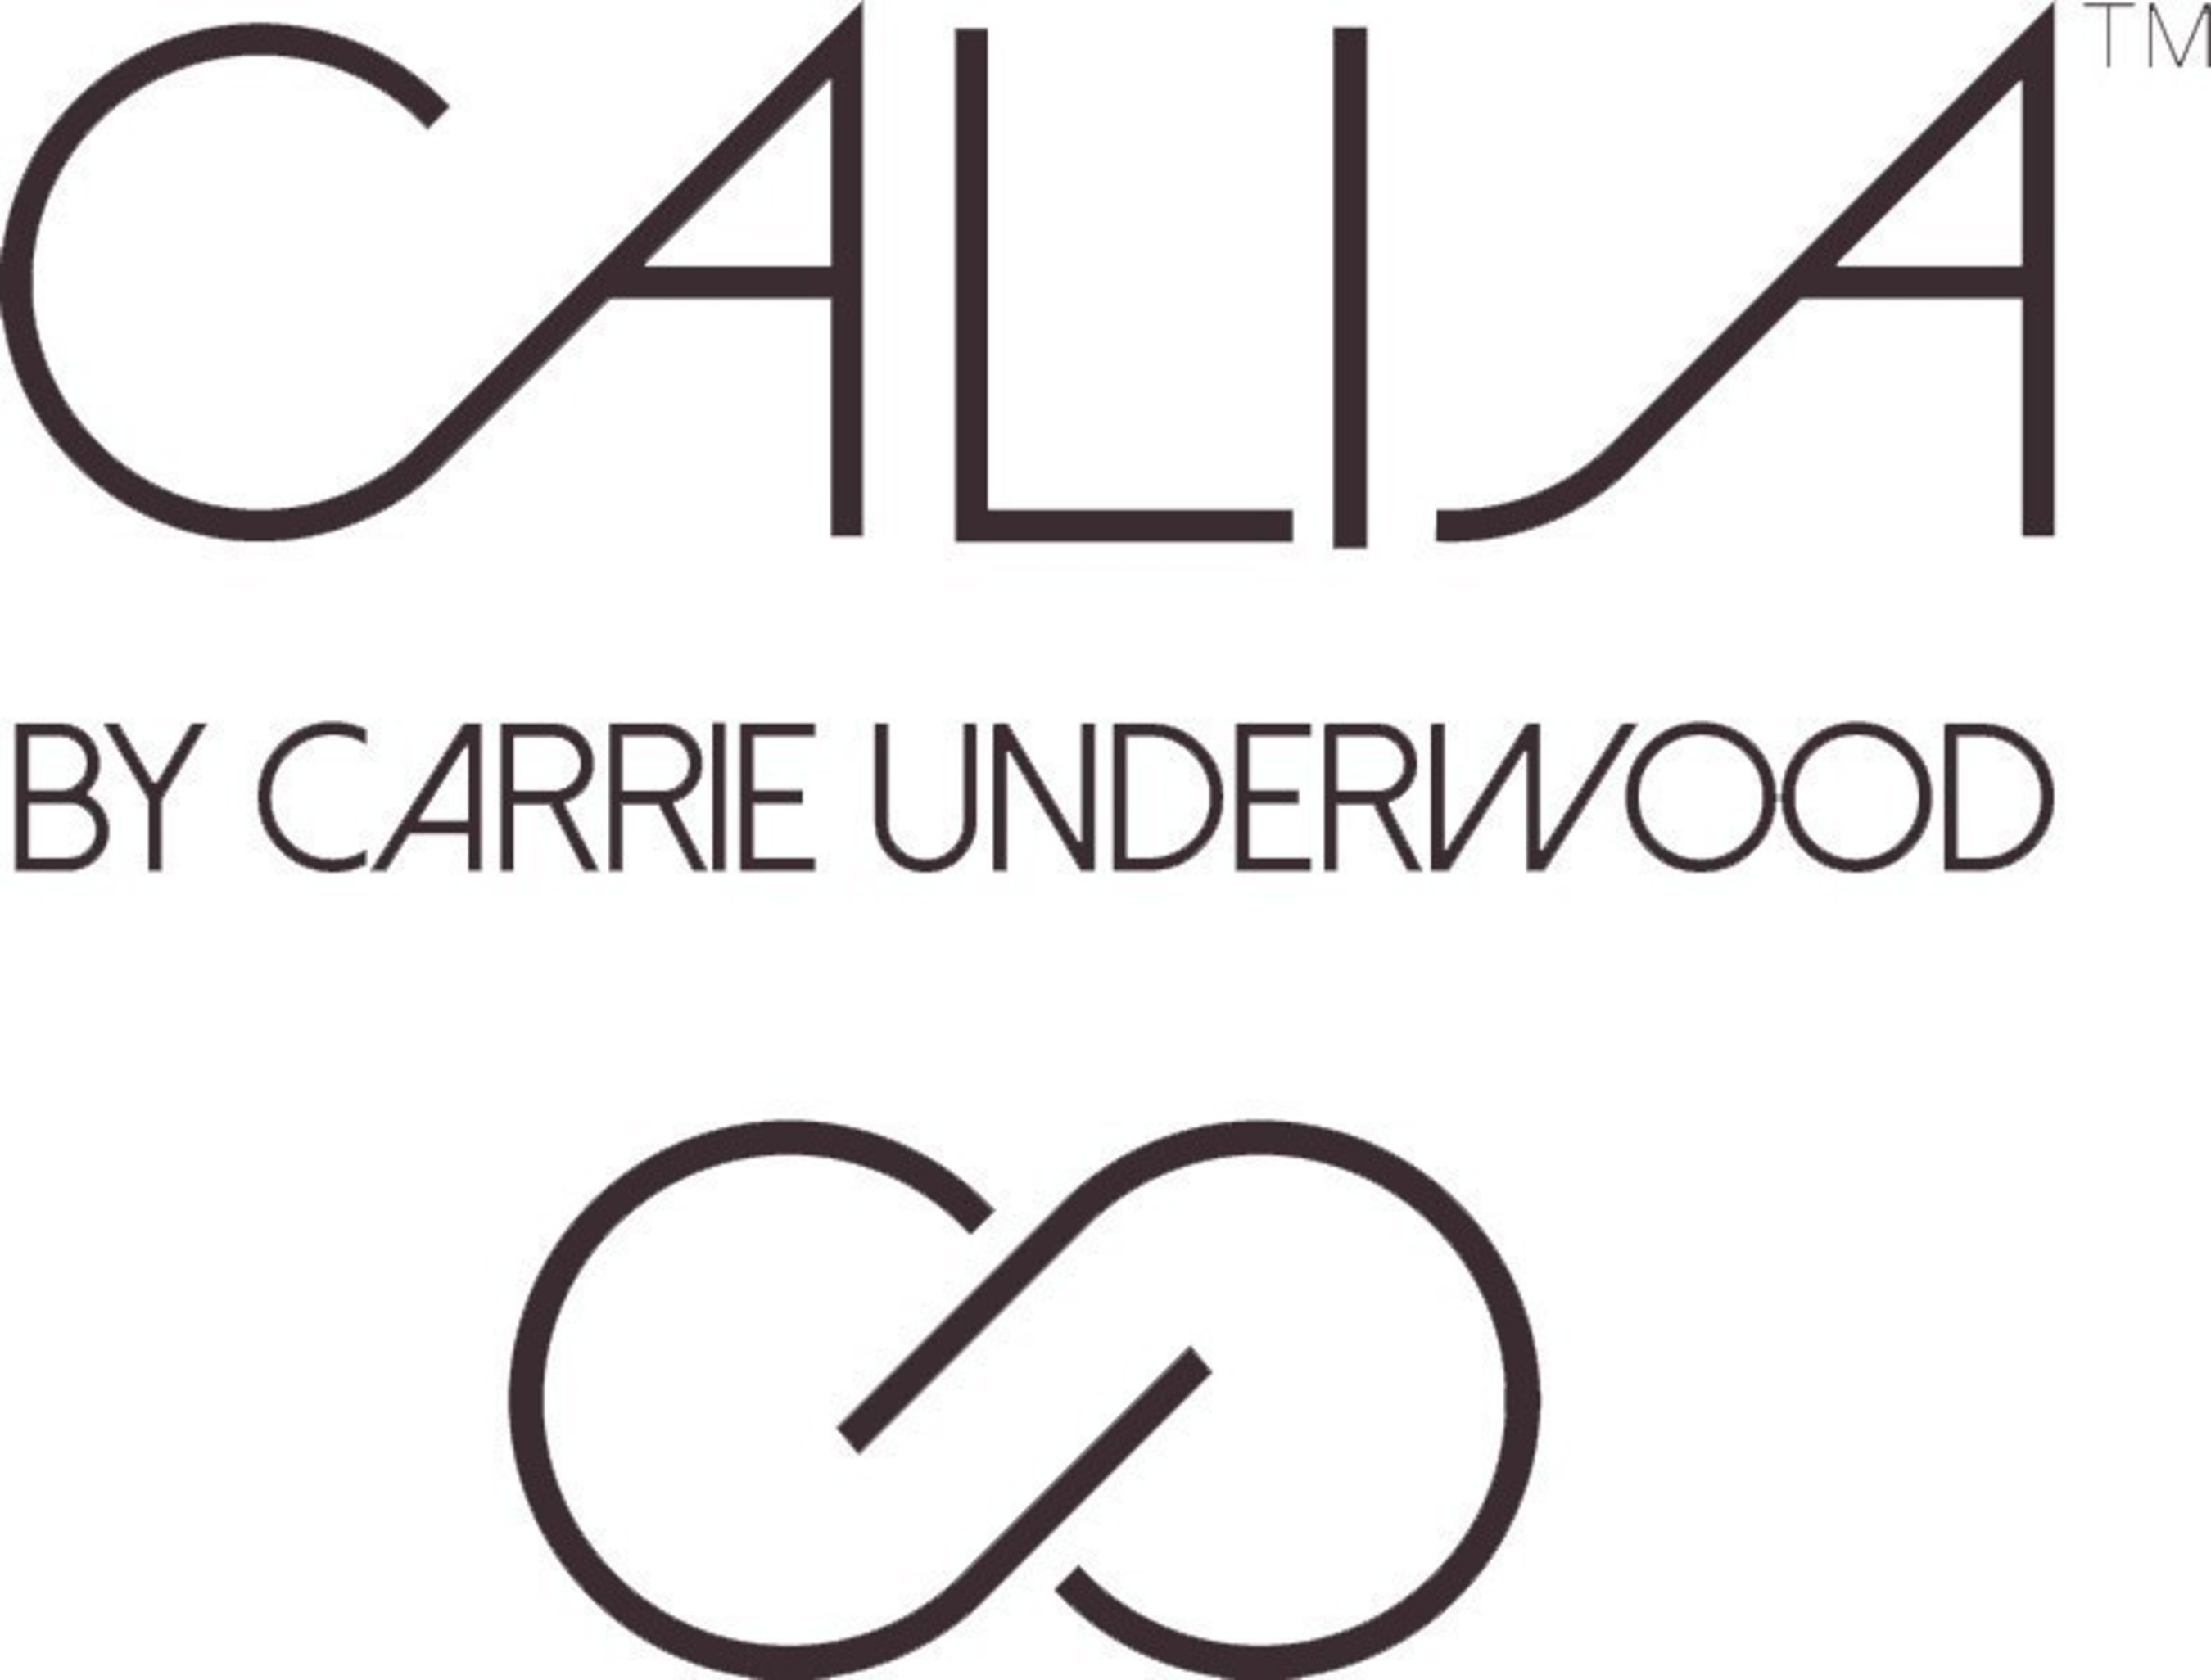 CALIA by Carrie Underwood in partnership with The DICK'S Sporting Goods  Foundation to donate $500,000 in Sports Matter grants to girls youth sports  teams across the country